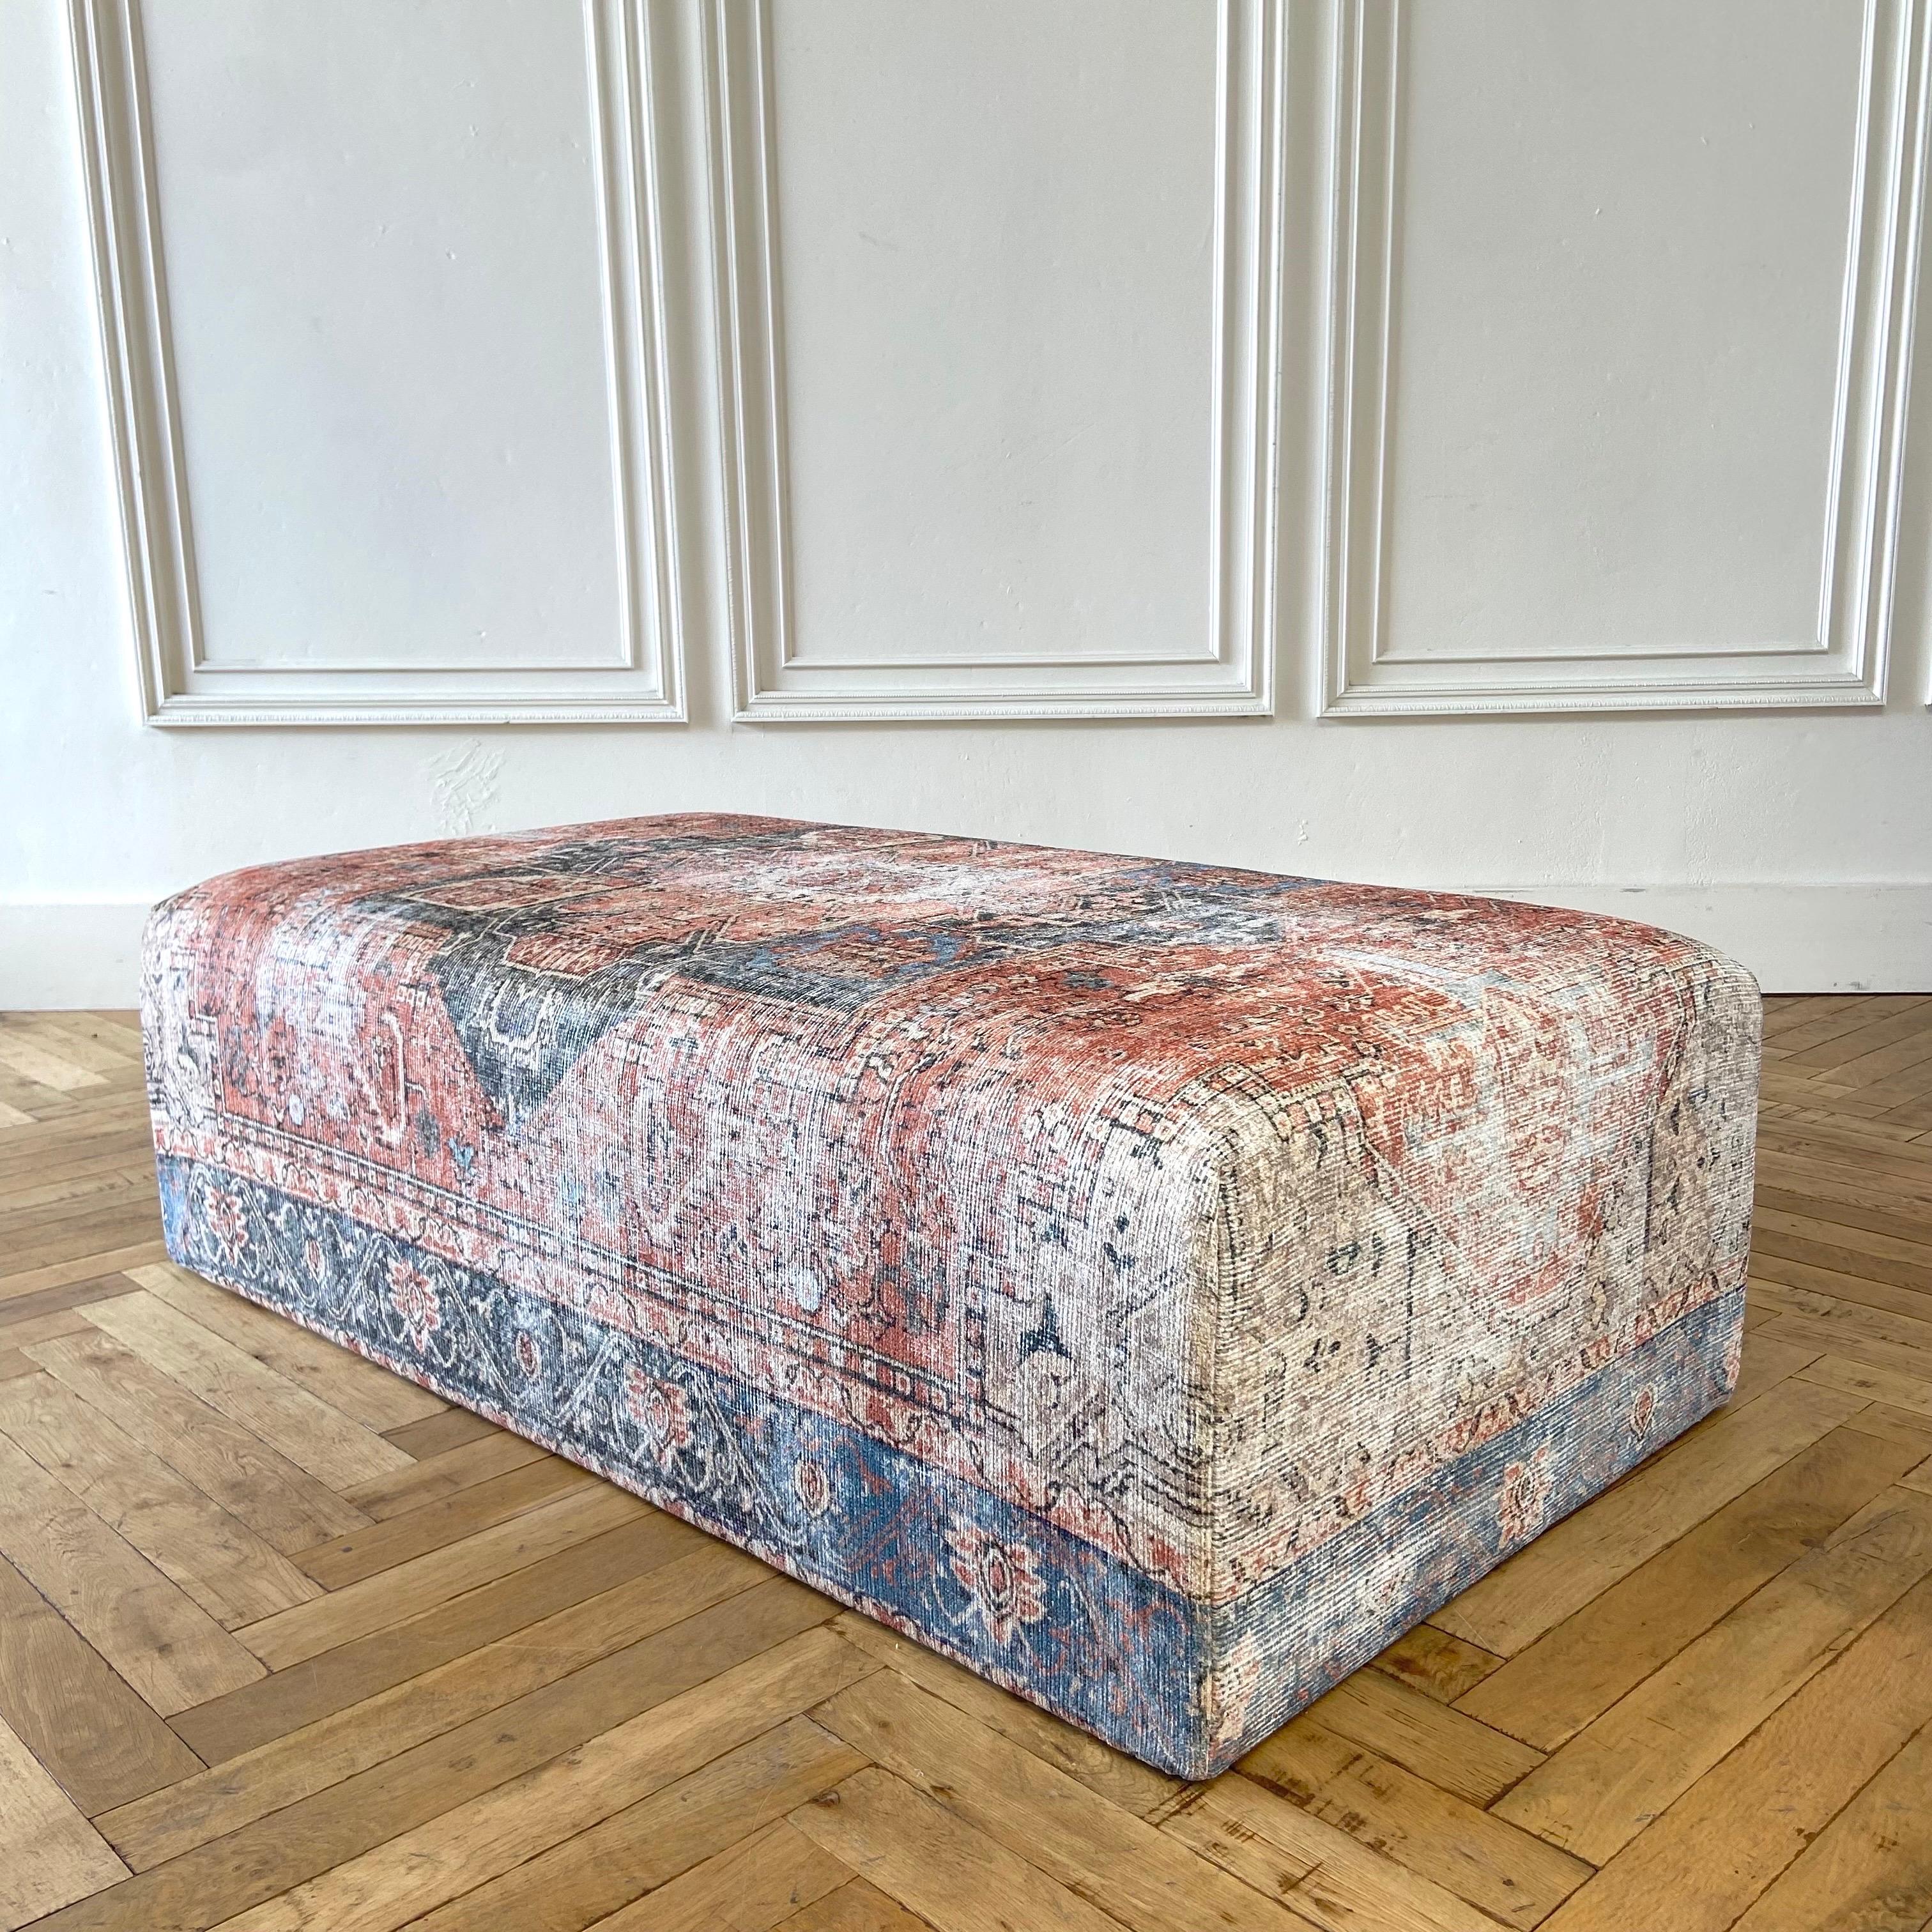 Custom made cube style ottoman. This can be remade and ordered to any size. The rug we are using is a new 